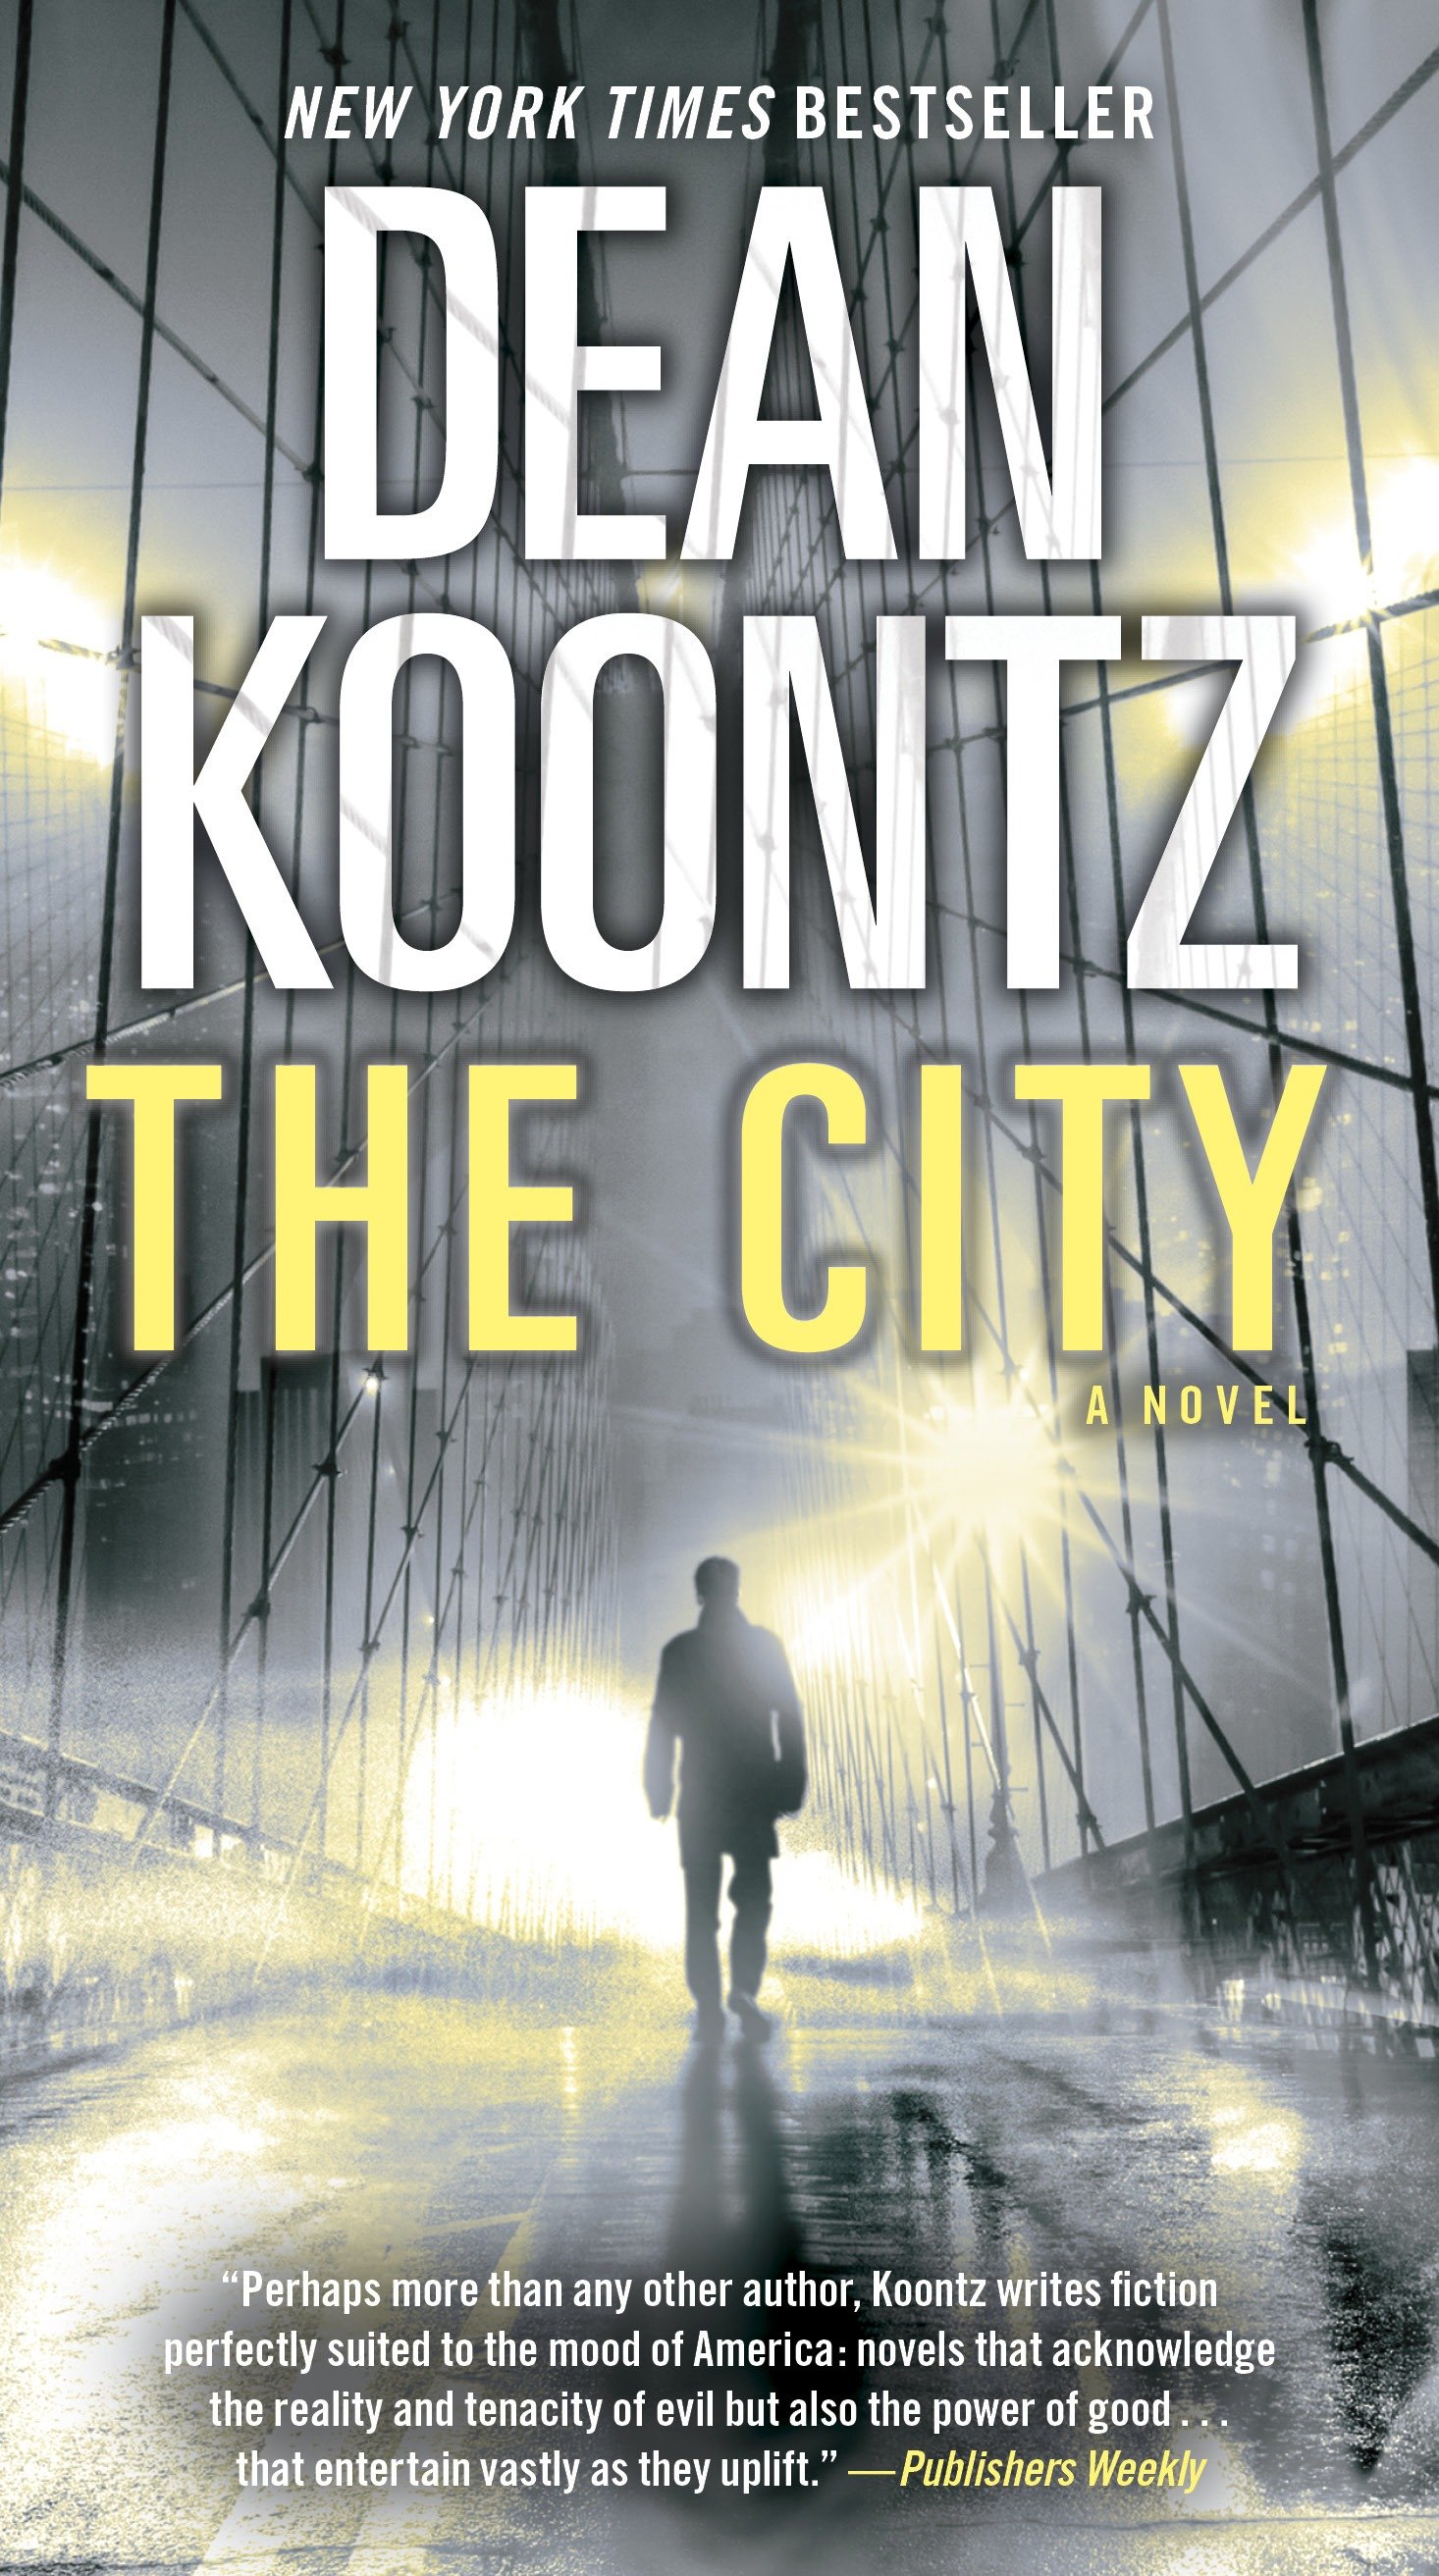 The city cover image